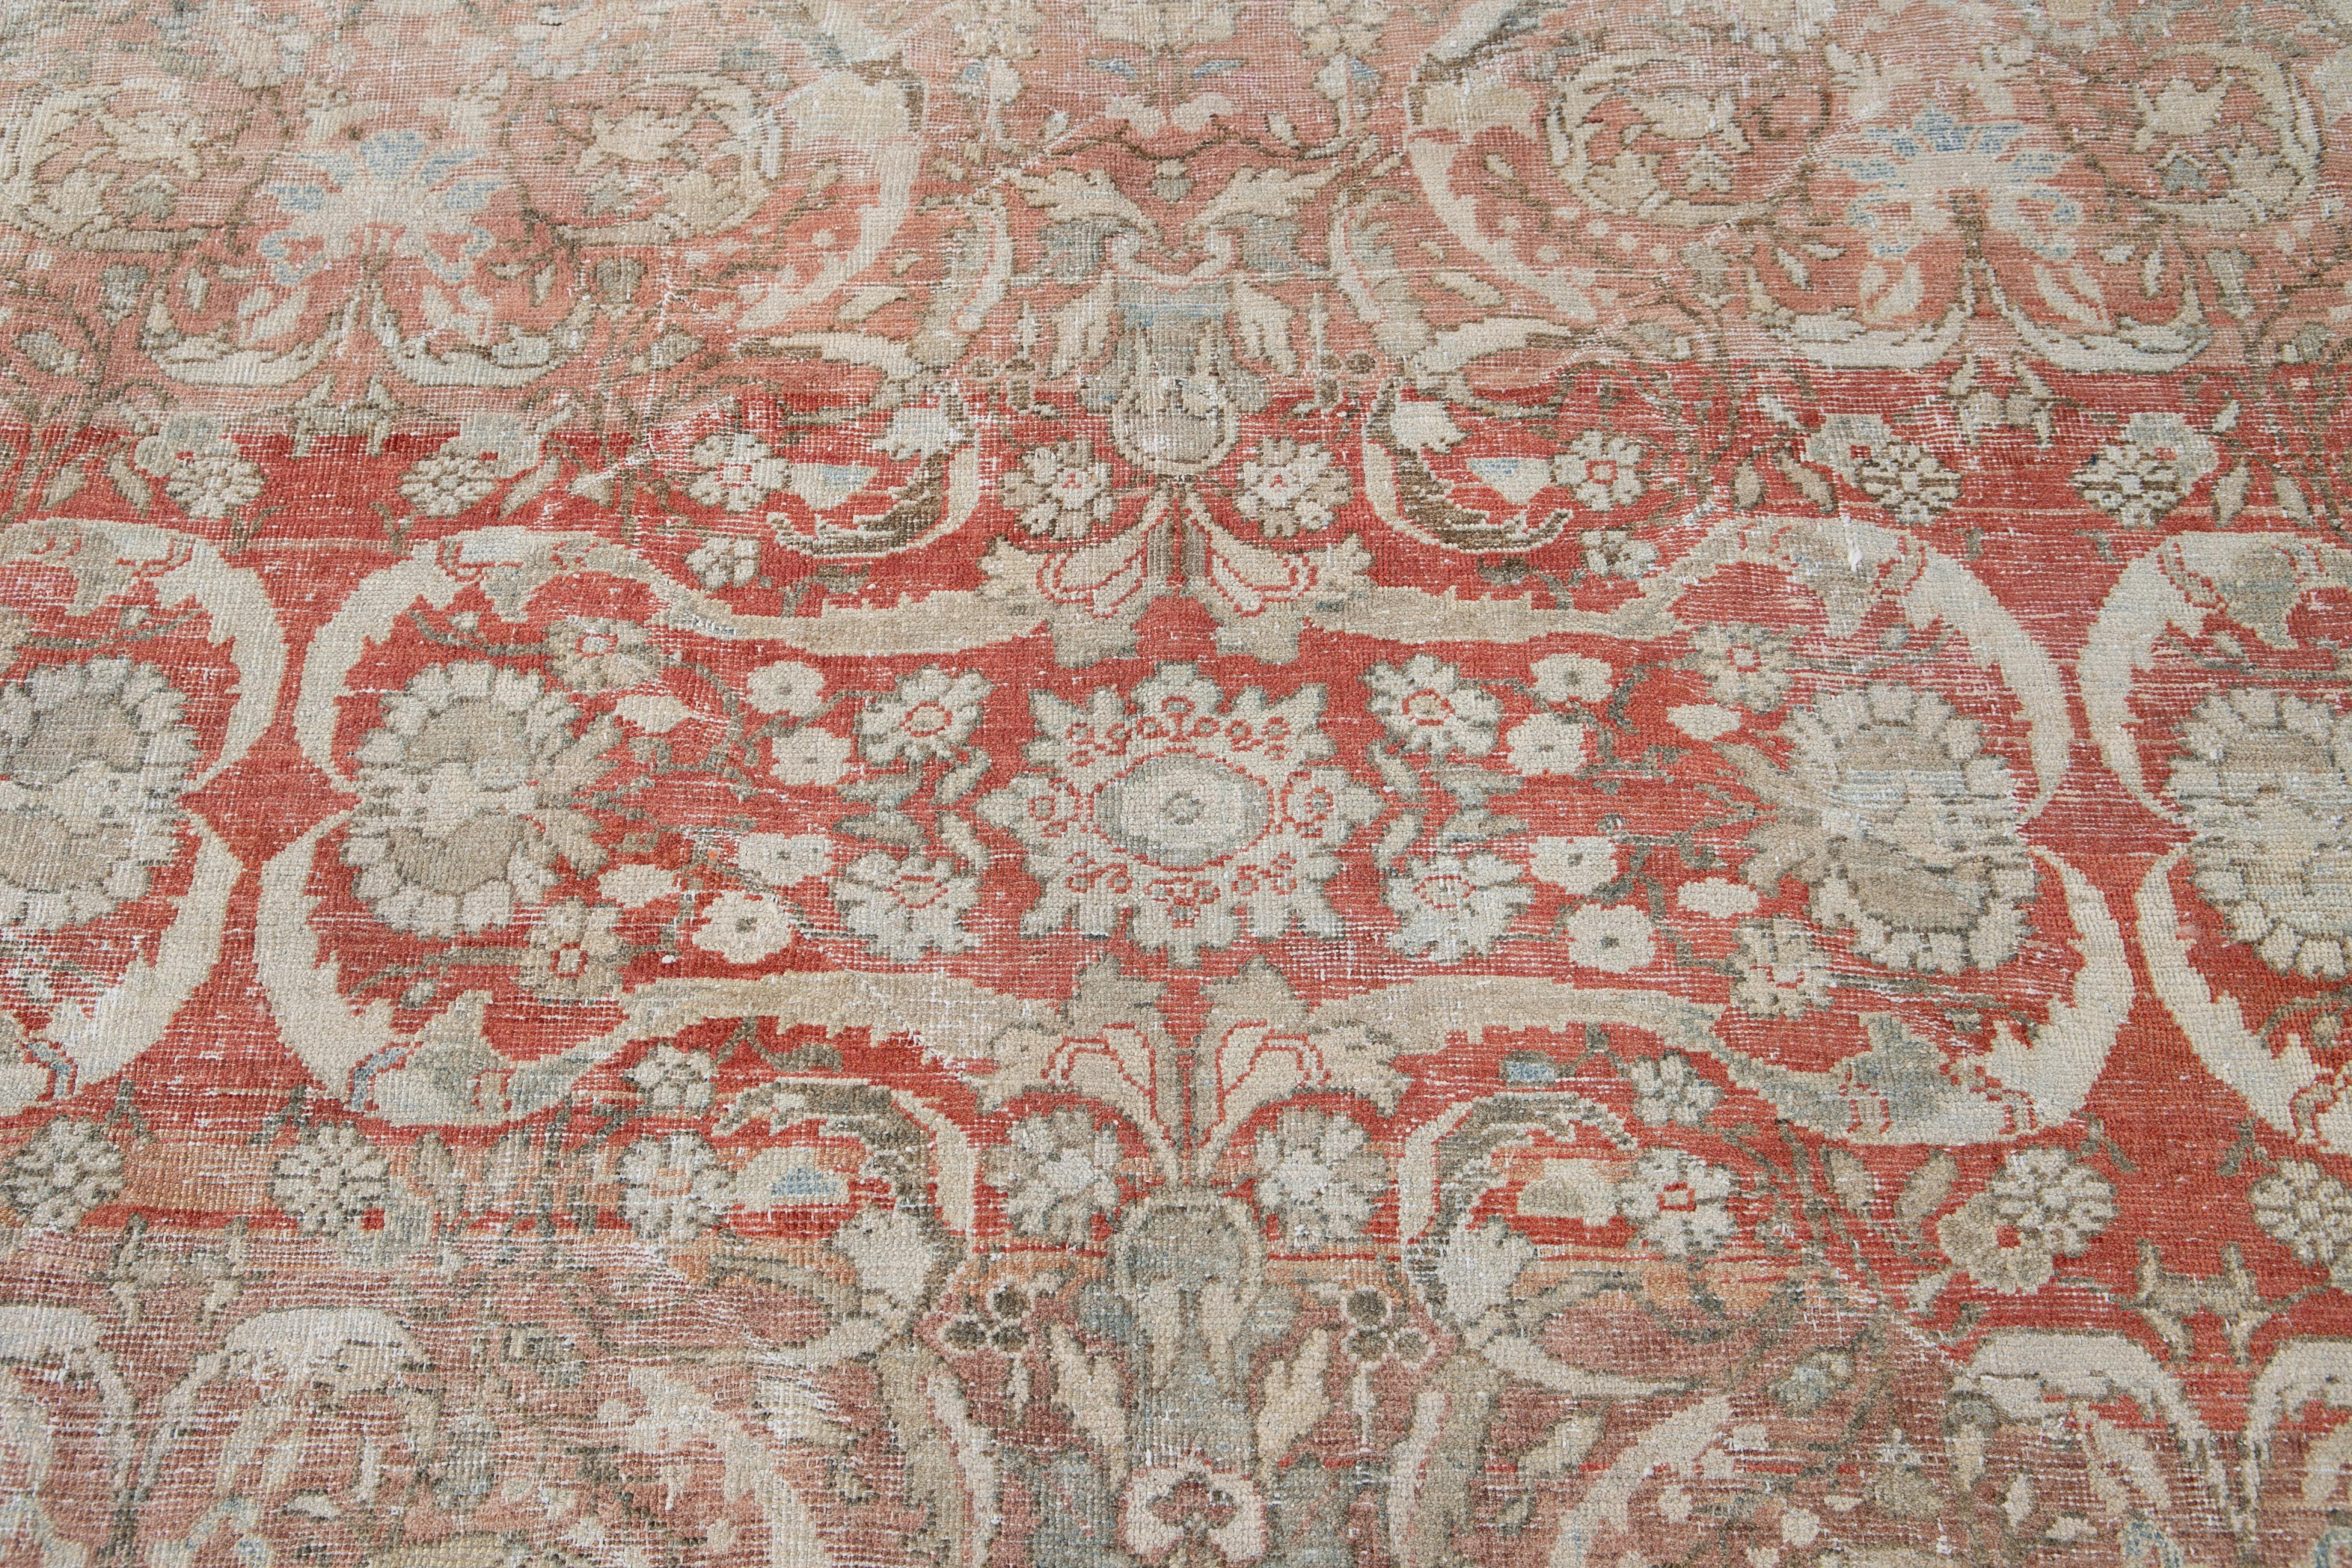 Early 20th Century Antique Shabby Chic Red Mahal Wool Rug For Sale